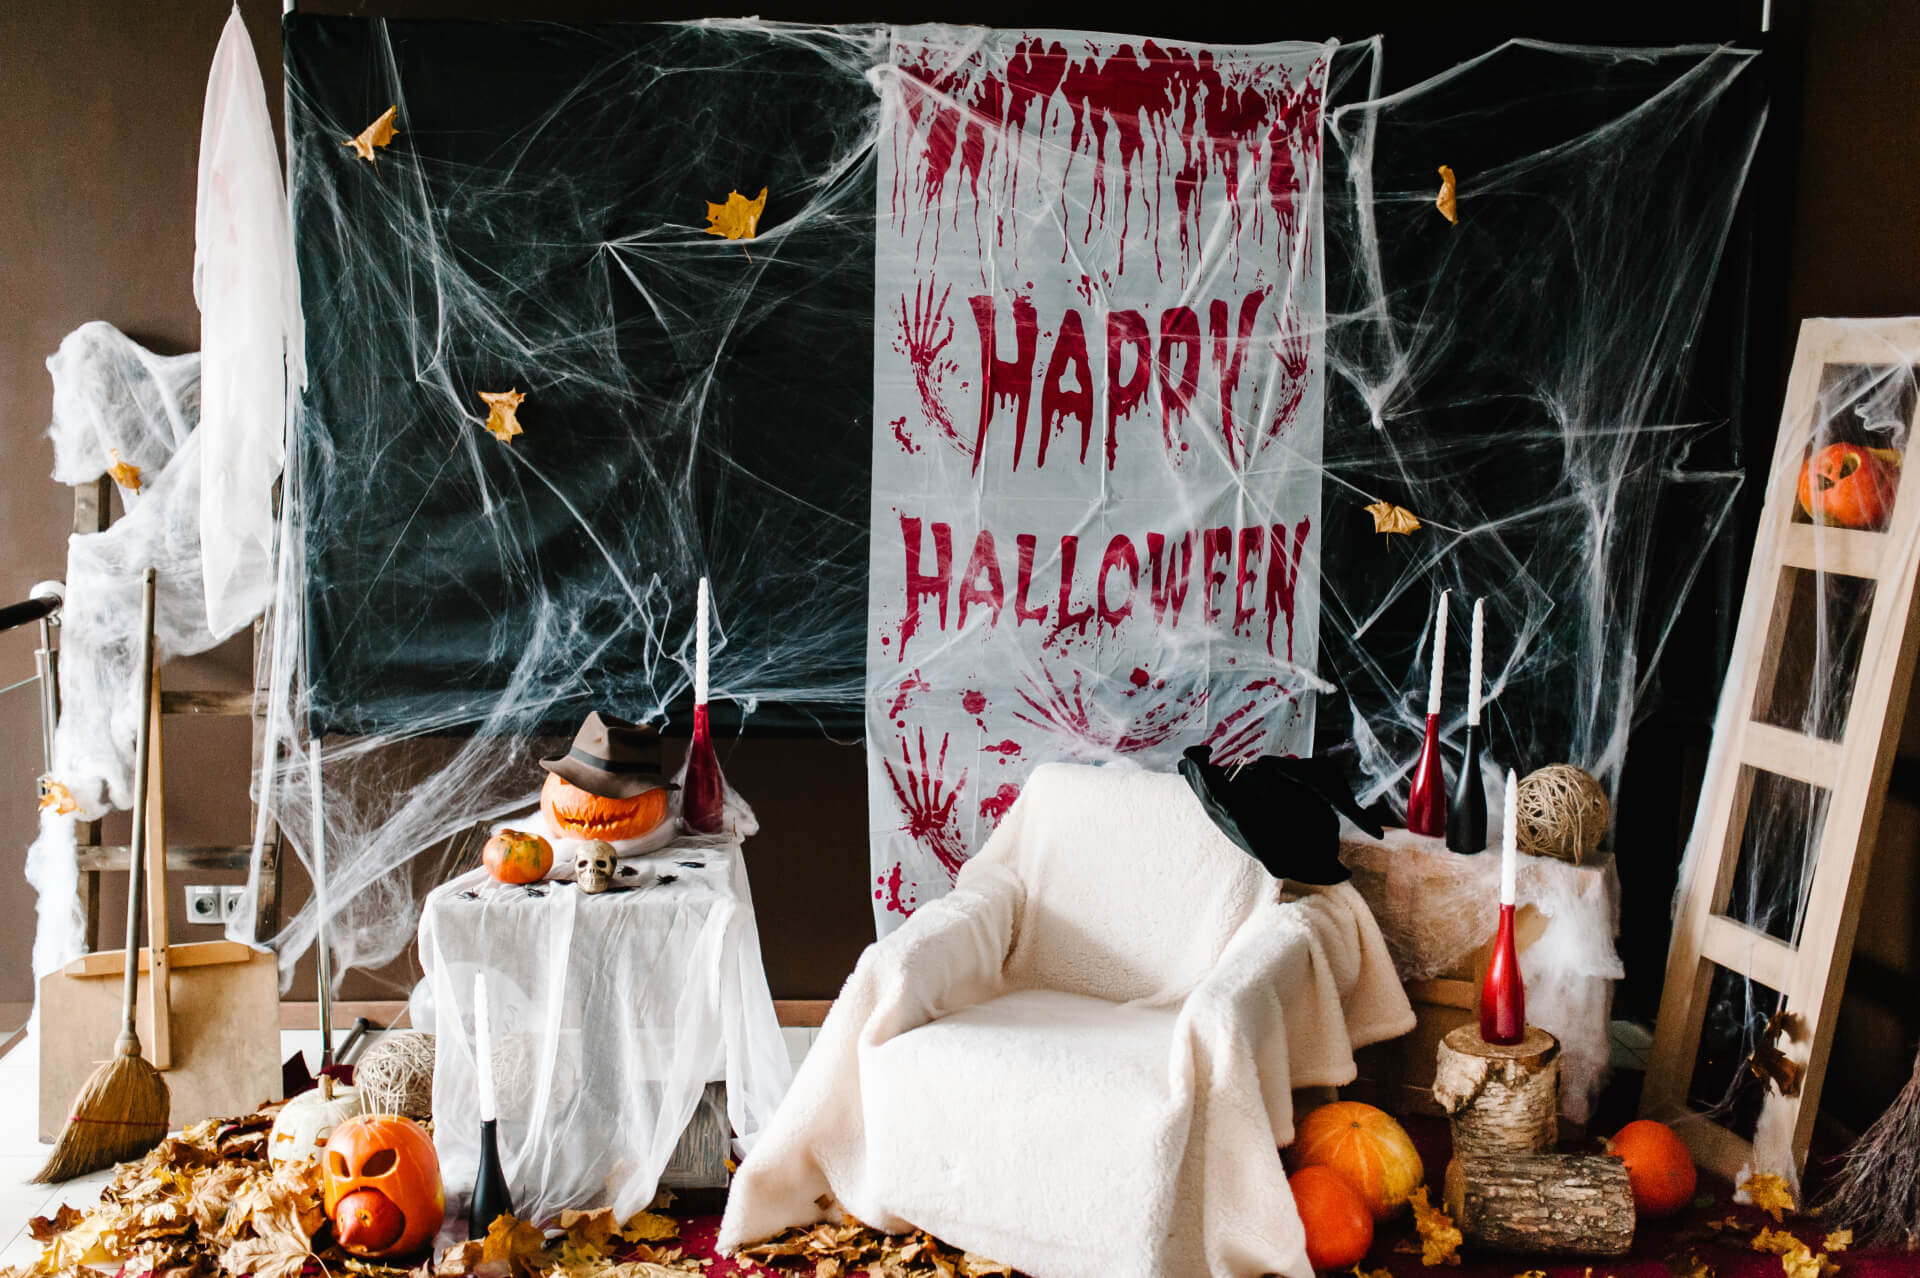 Games for a successful Halloween party? Here are ideas like the Halloween Escape Room and other spooky activities.